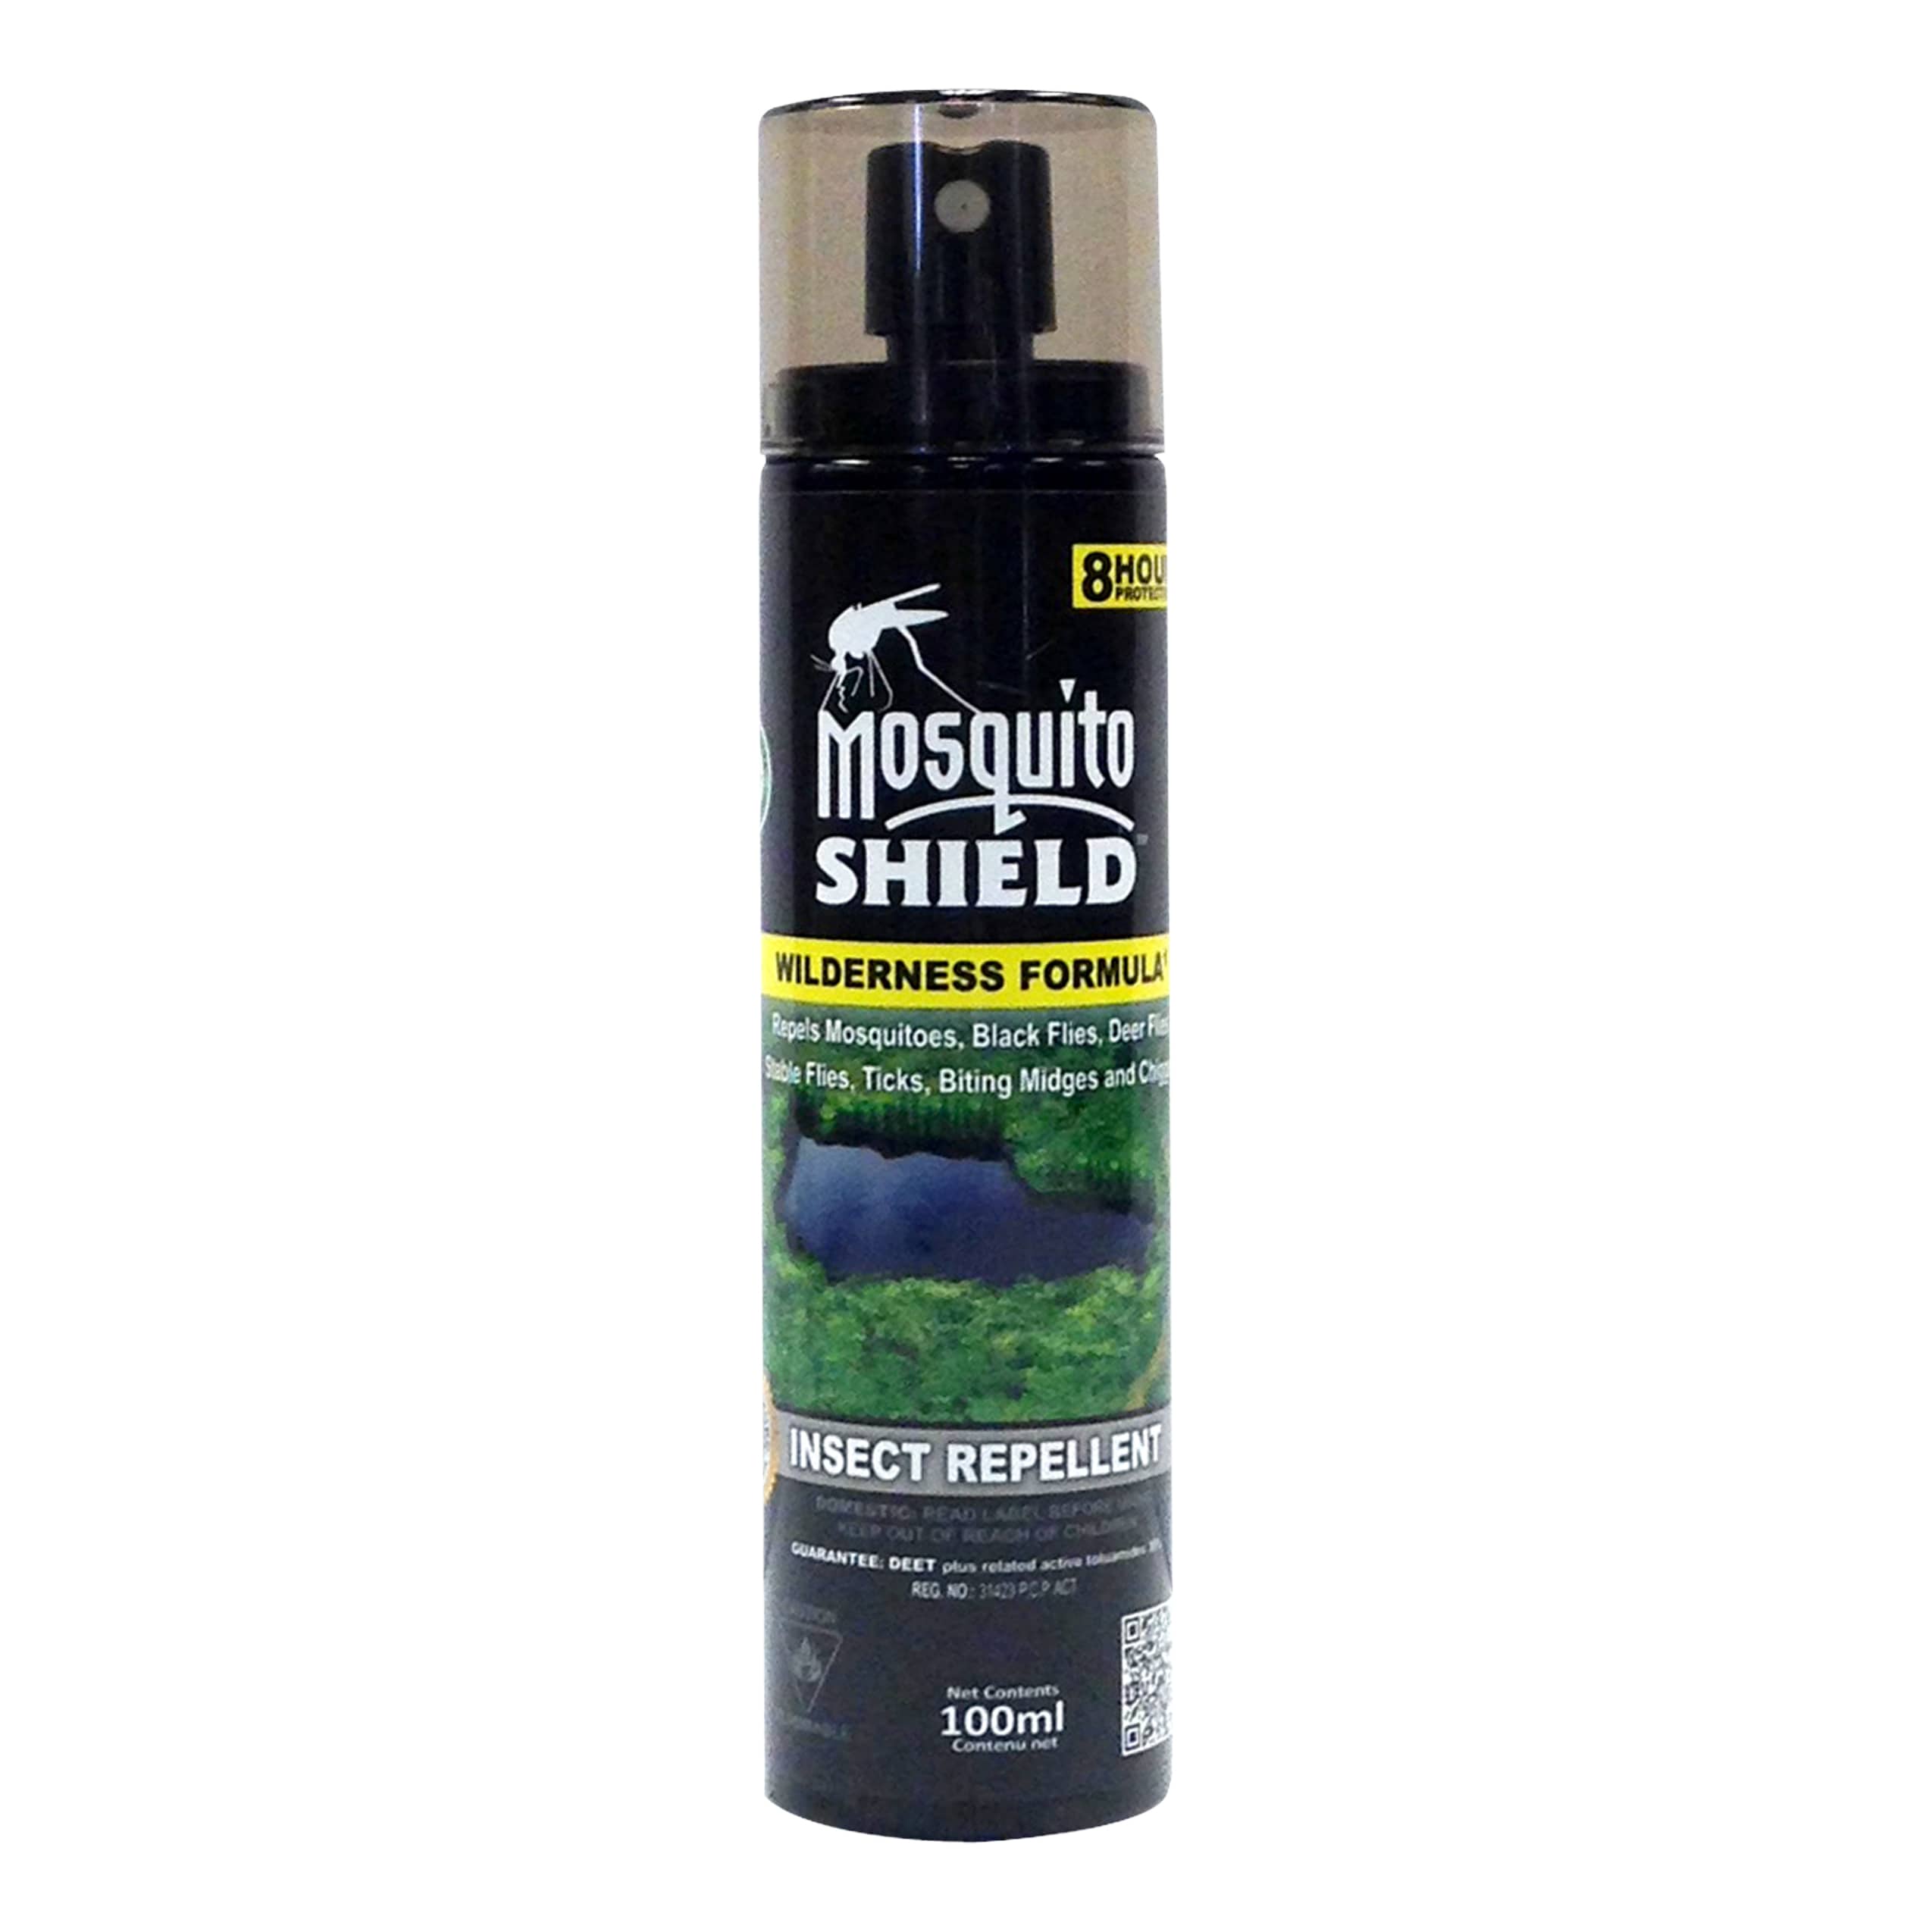 Mosquito Shield Wilderness Travel Size Insect Repellent